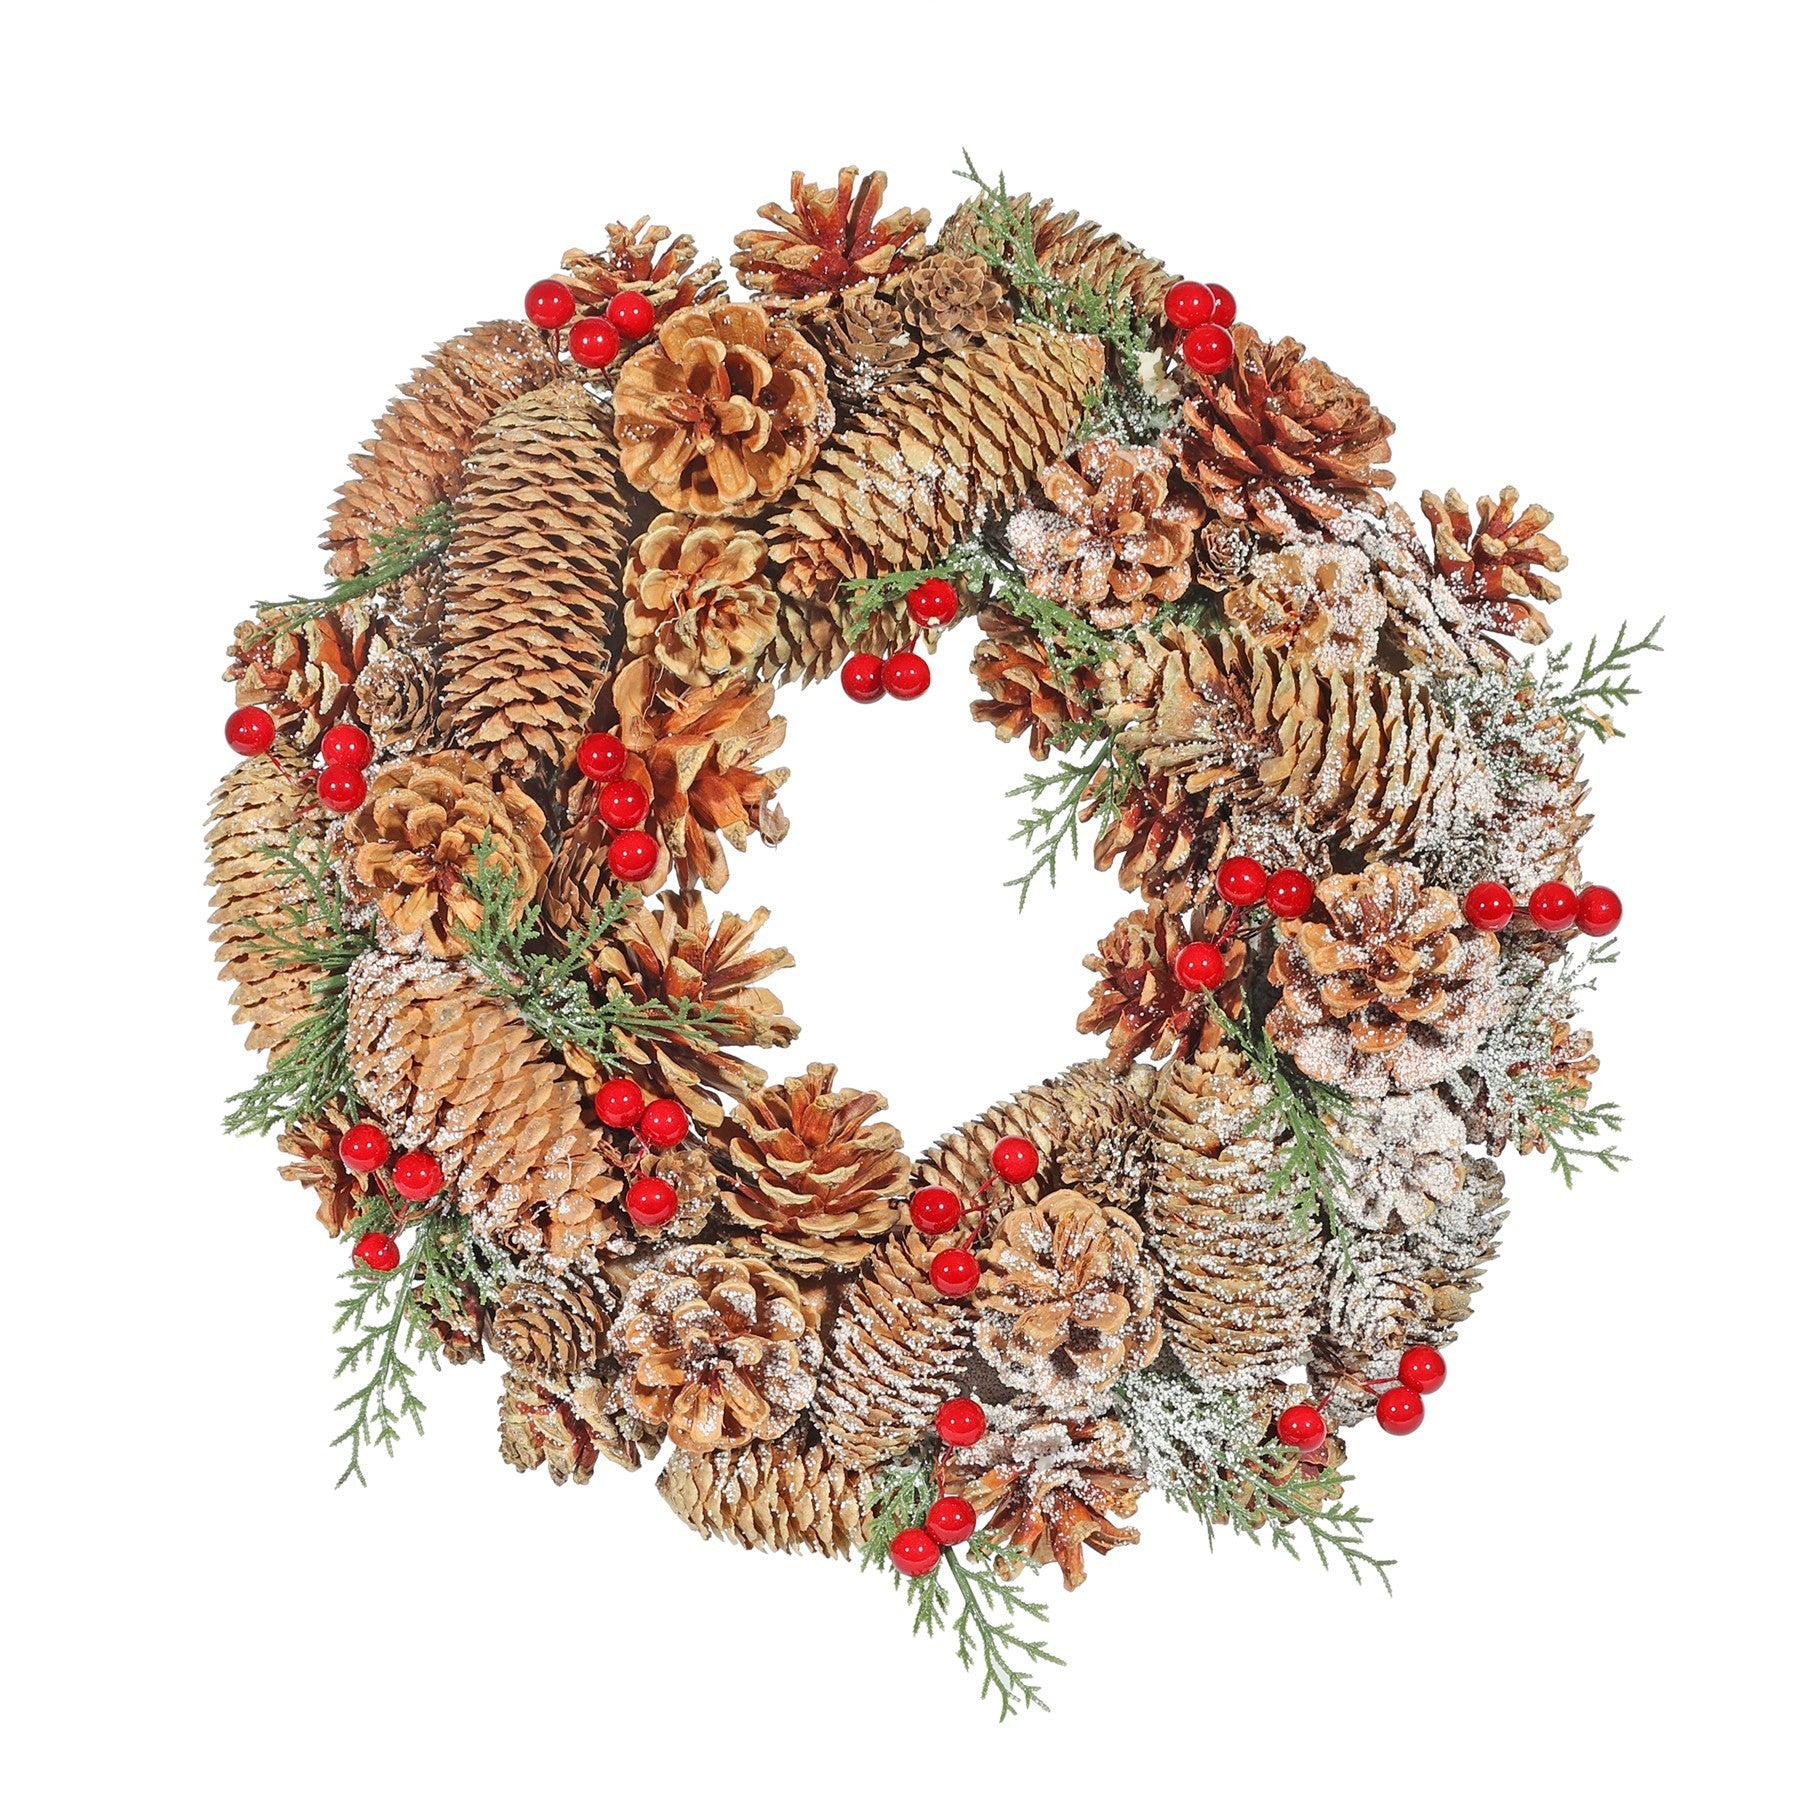 View Woodland Snowy Wreath with Berries 36cm information